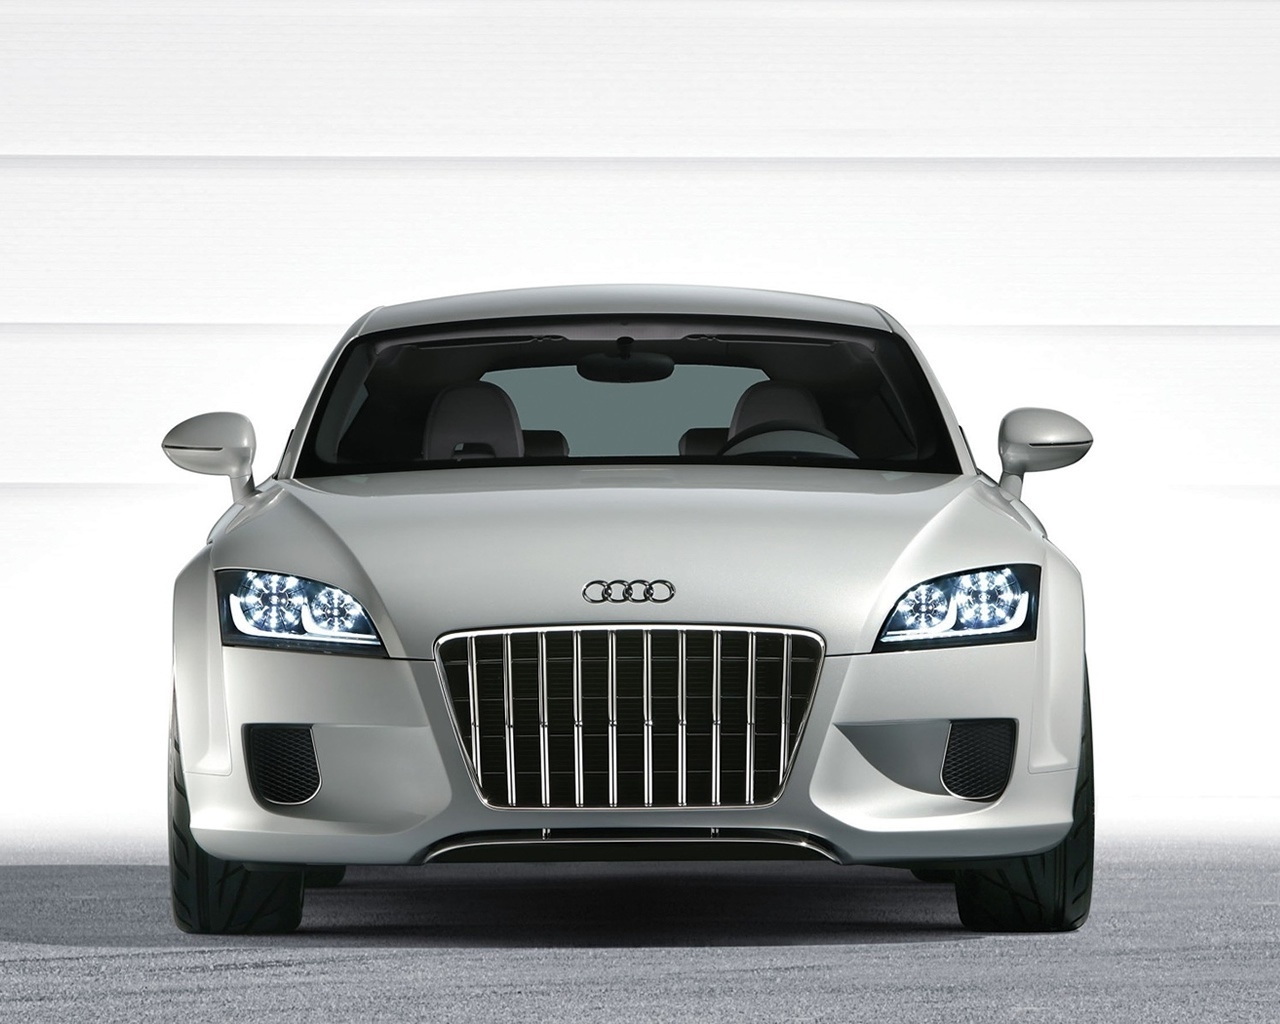 Audi A1 Concept Front for 1280 x 1024 resolution